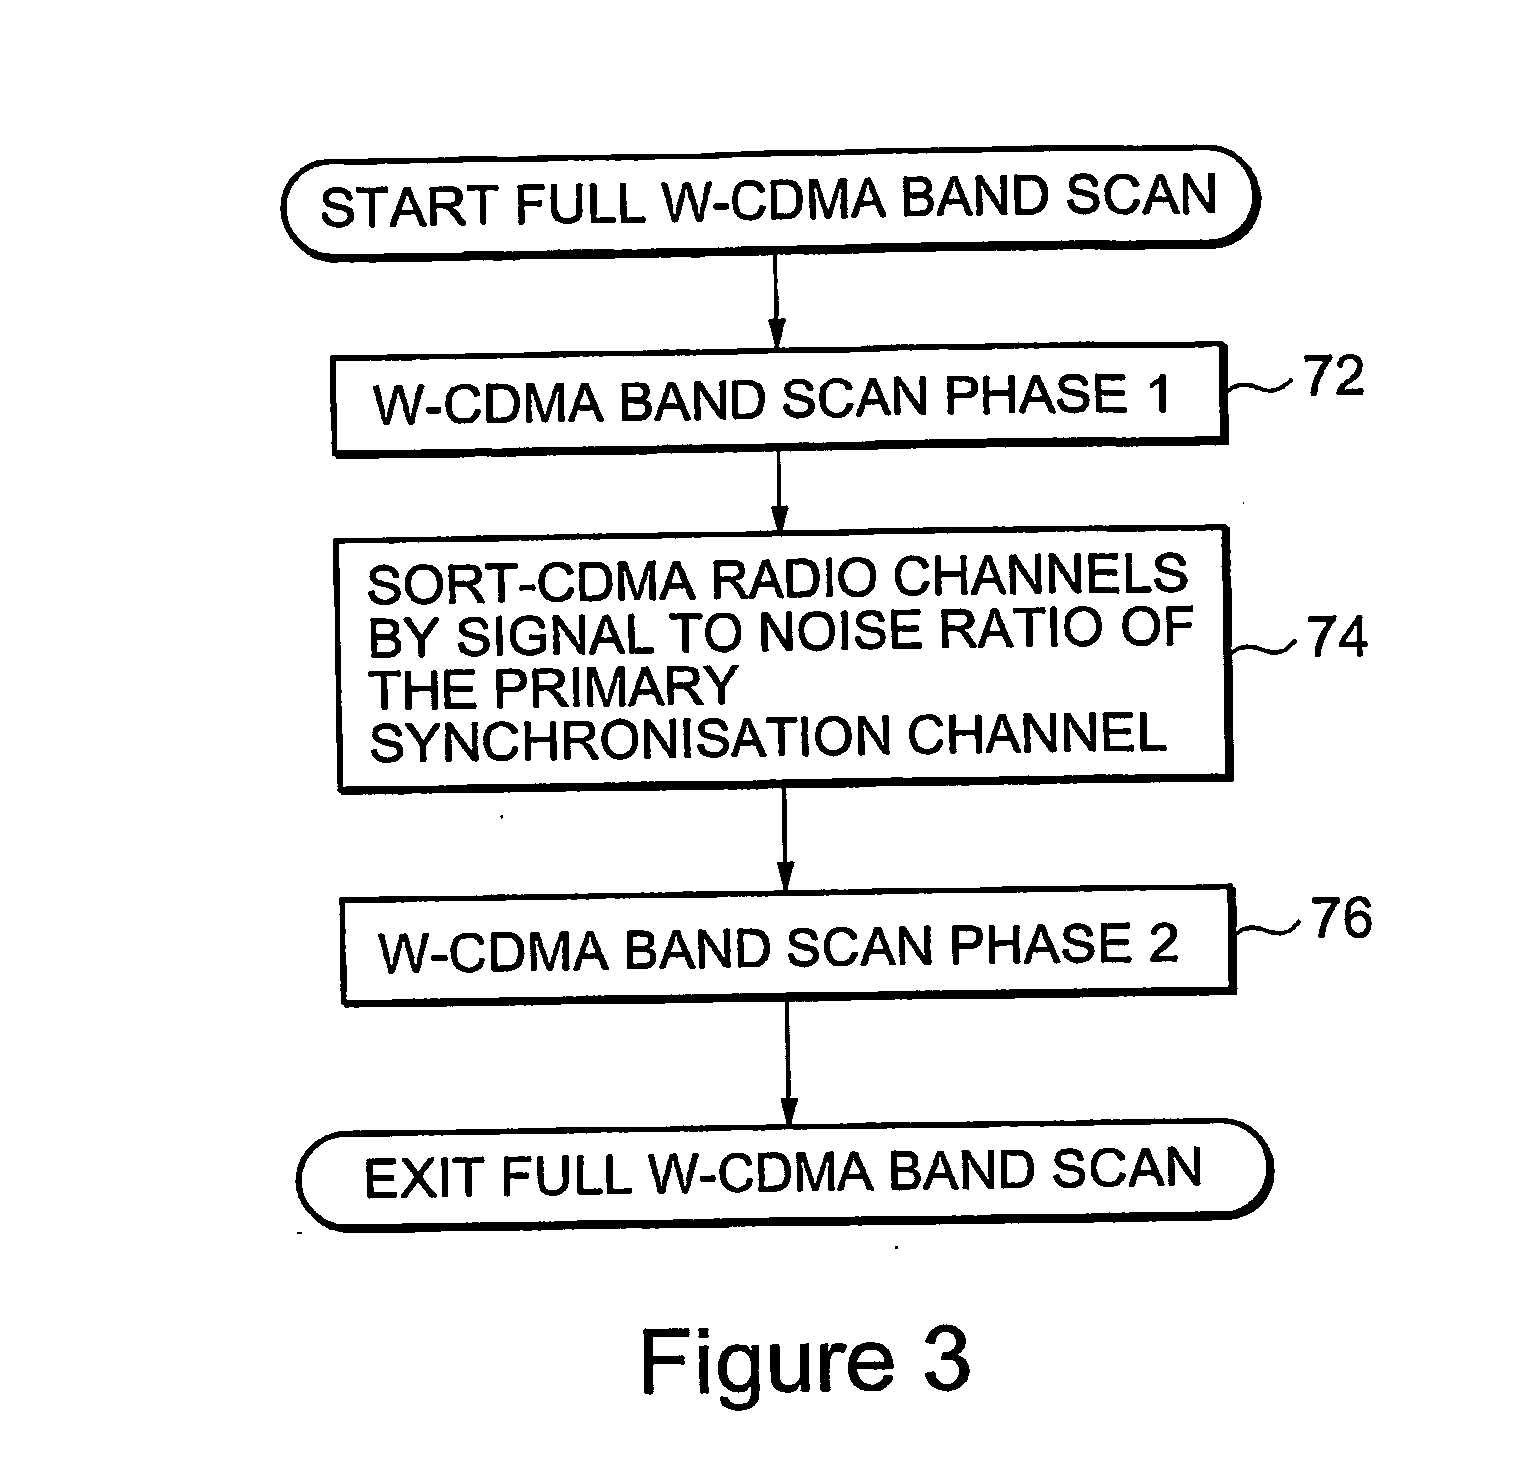 Cell search process for wireless communication system